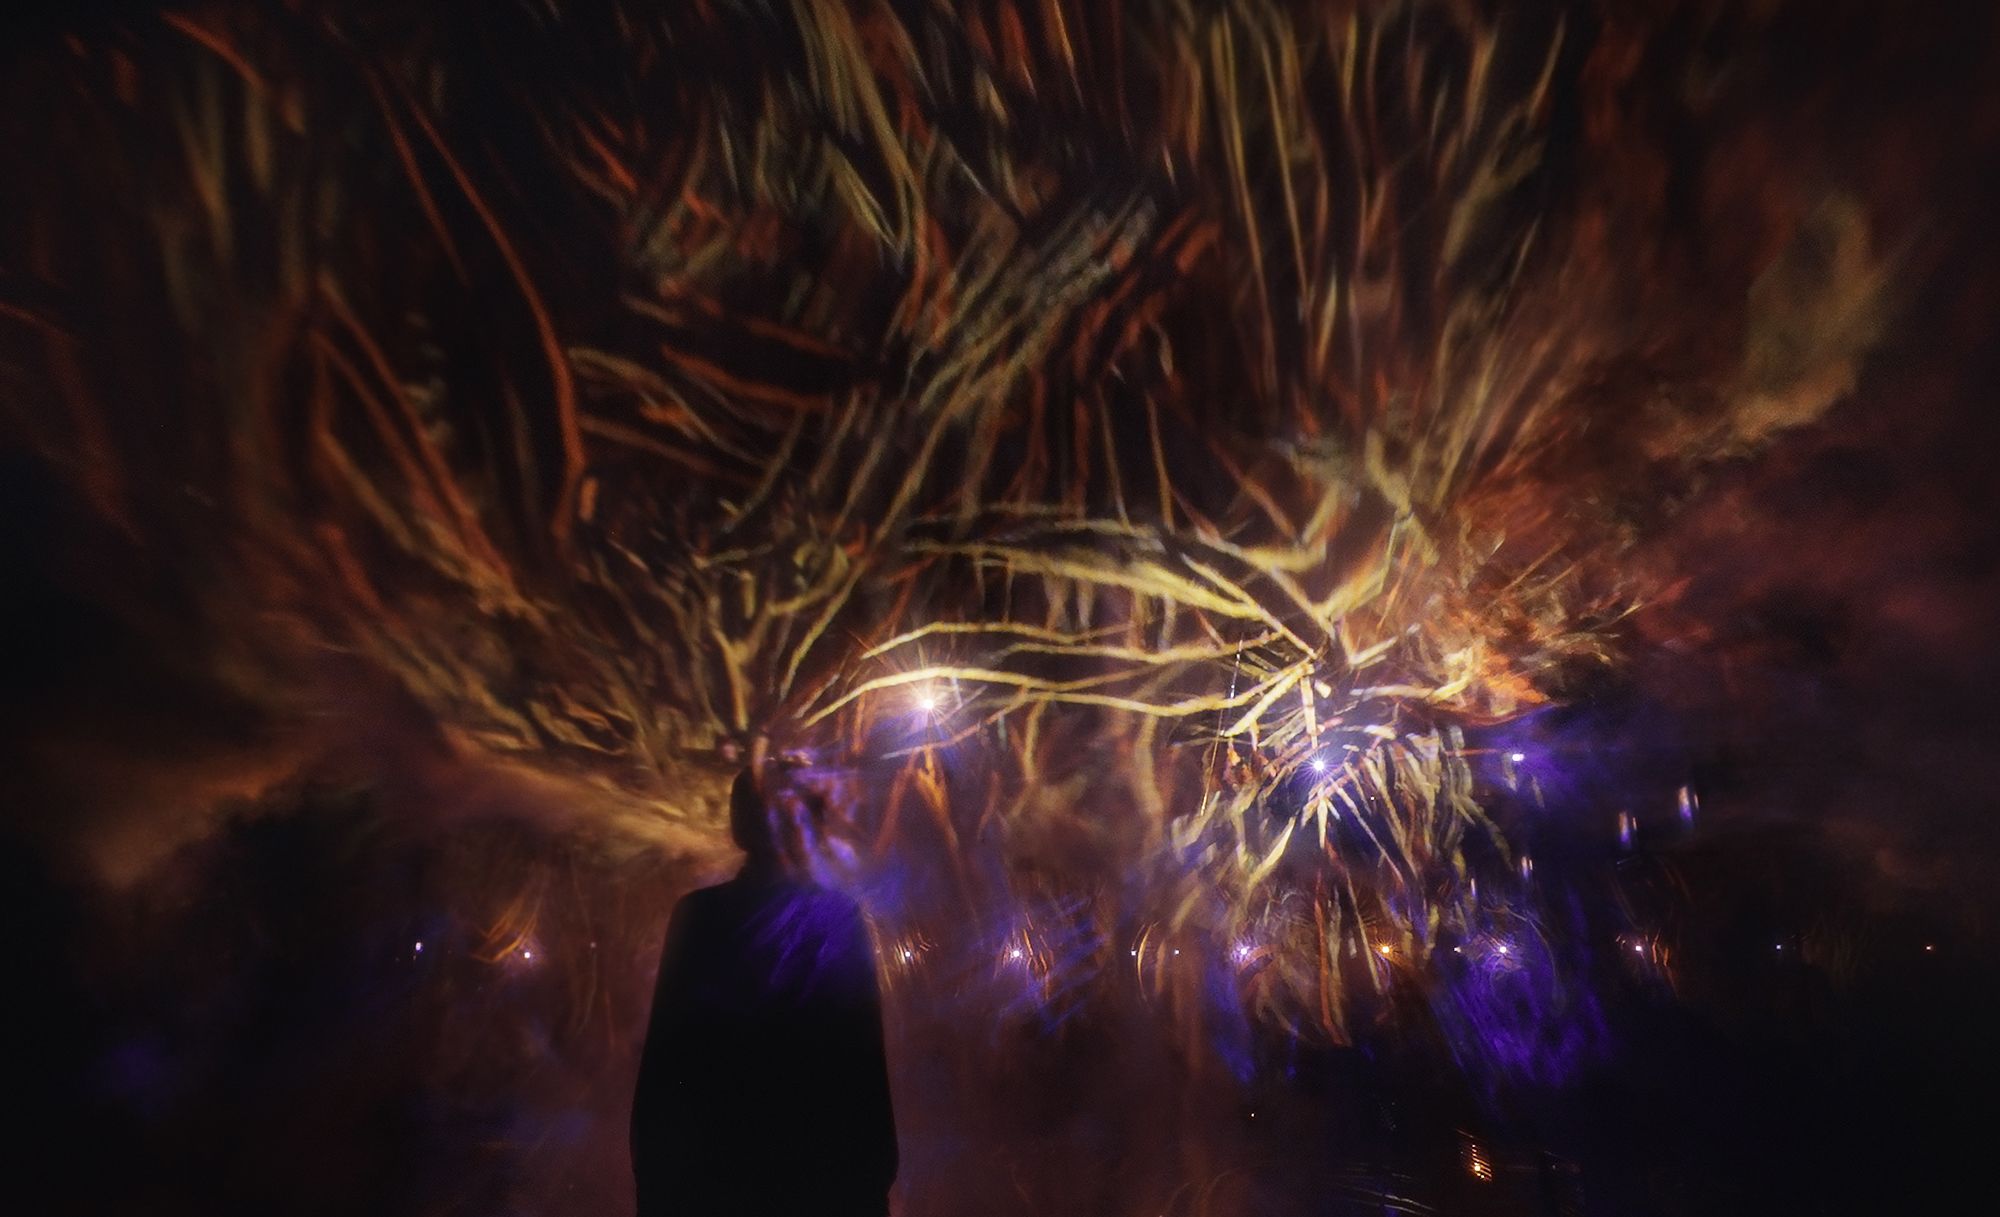 One of teamLab's new installations, "Universe of Fire Particles Dissolving."